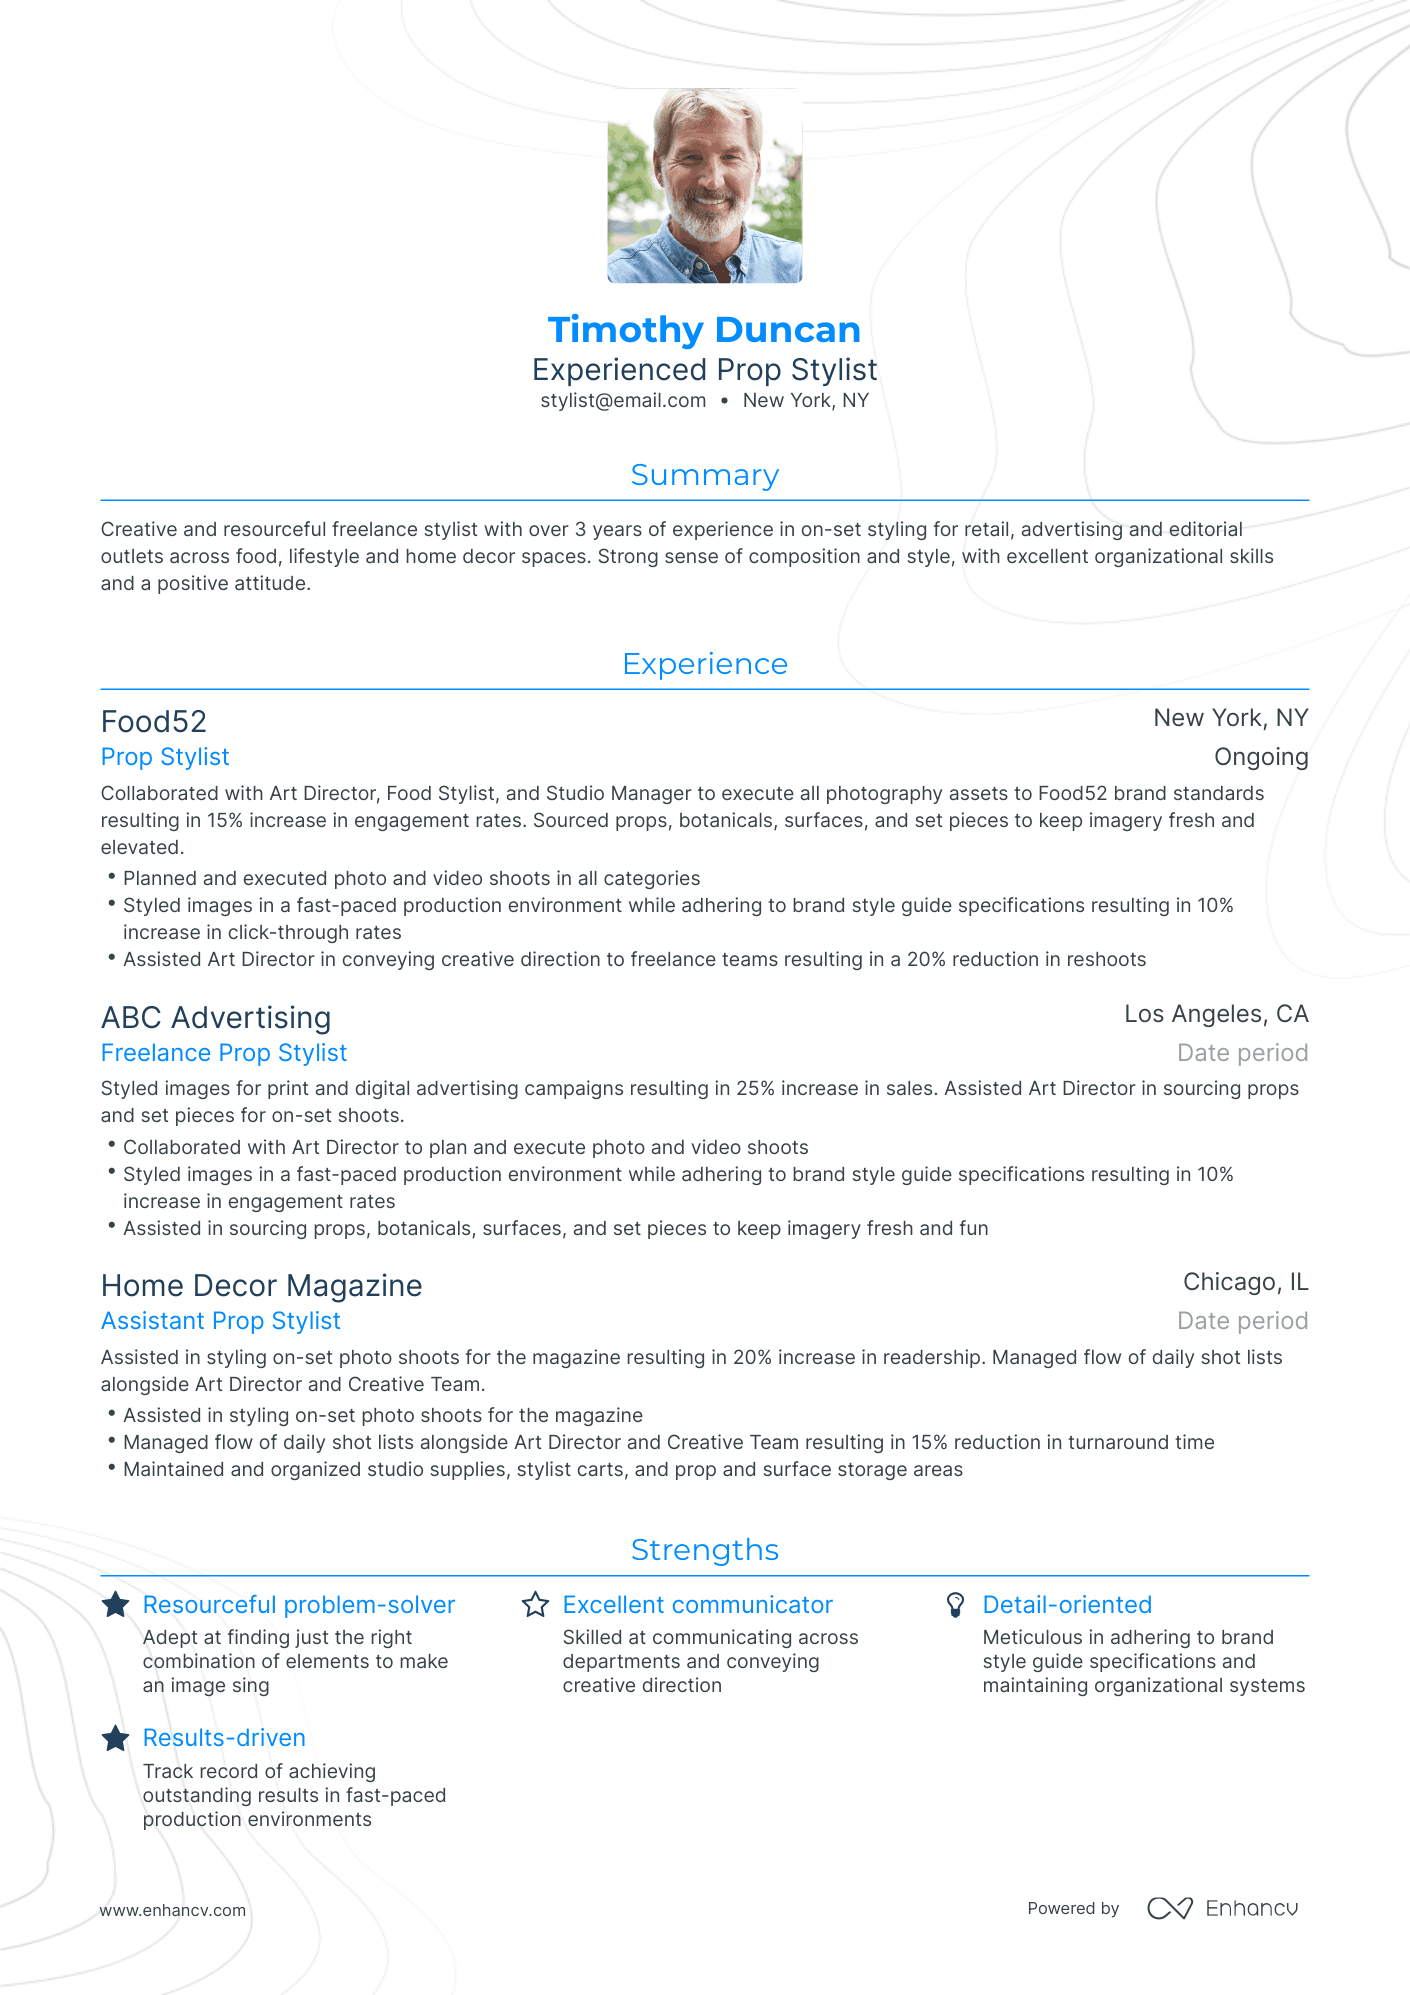 Traditional Freelance Stylist Resume Template